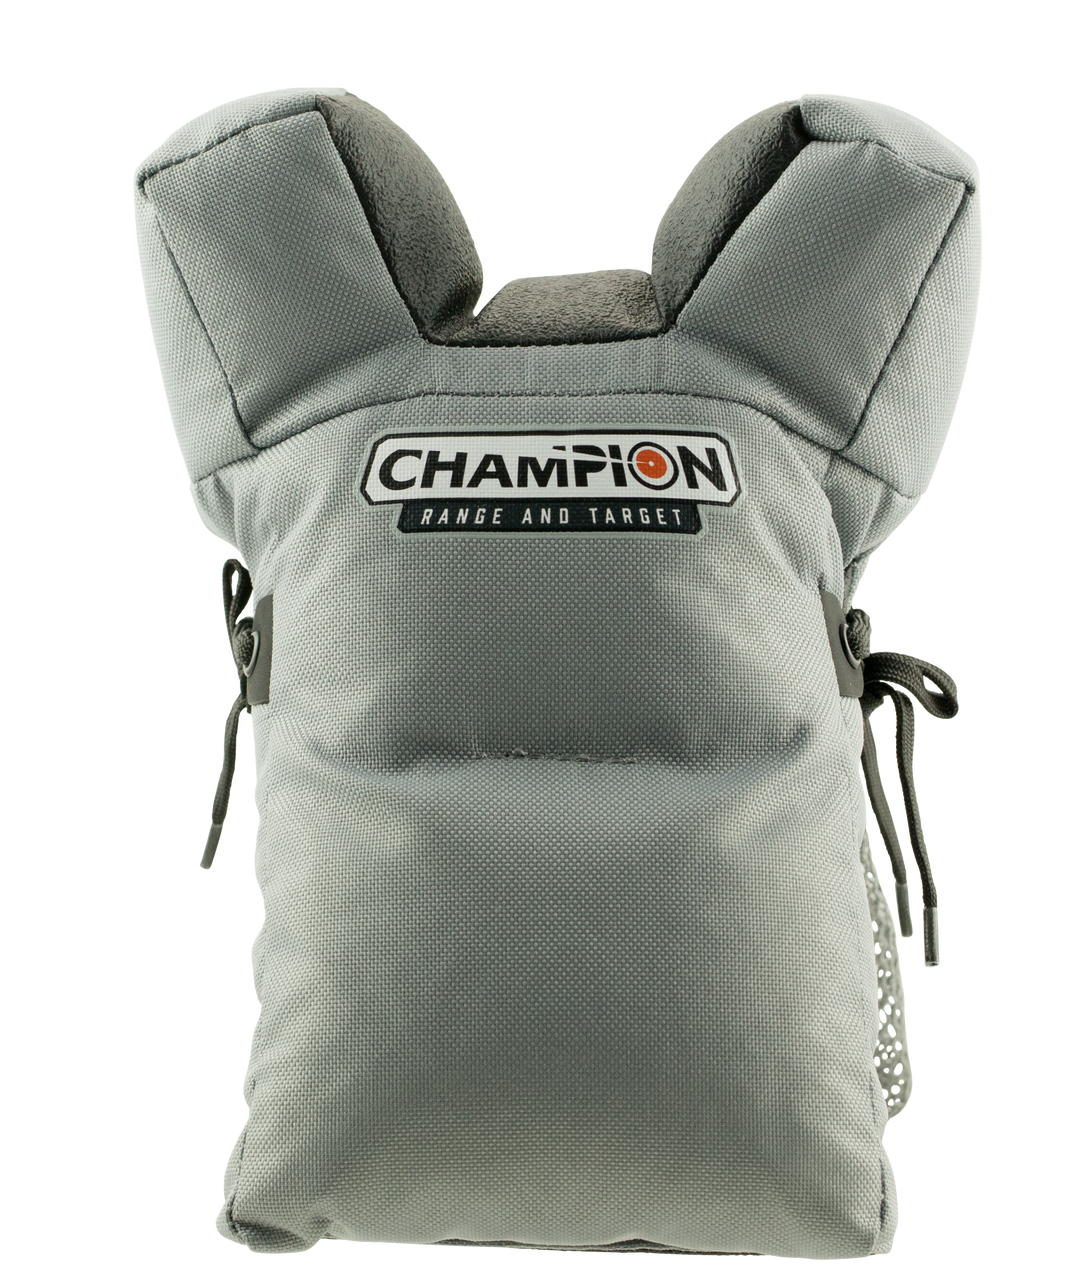 CHAMP 40895 RAIL RIDER FRONT SHOOTING BAG Champion Targets for sale